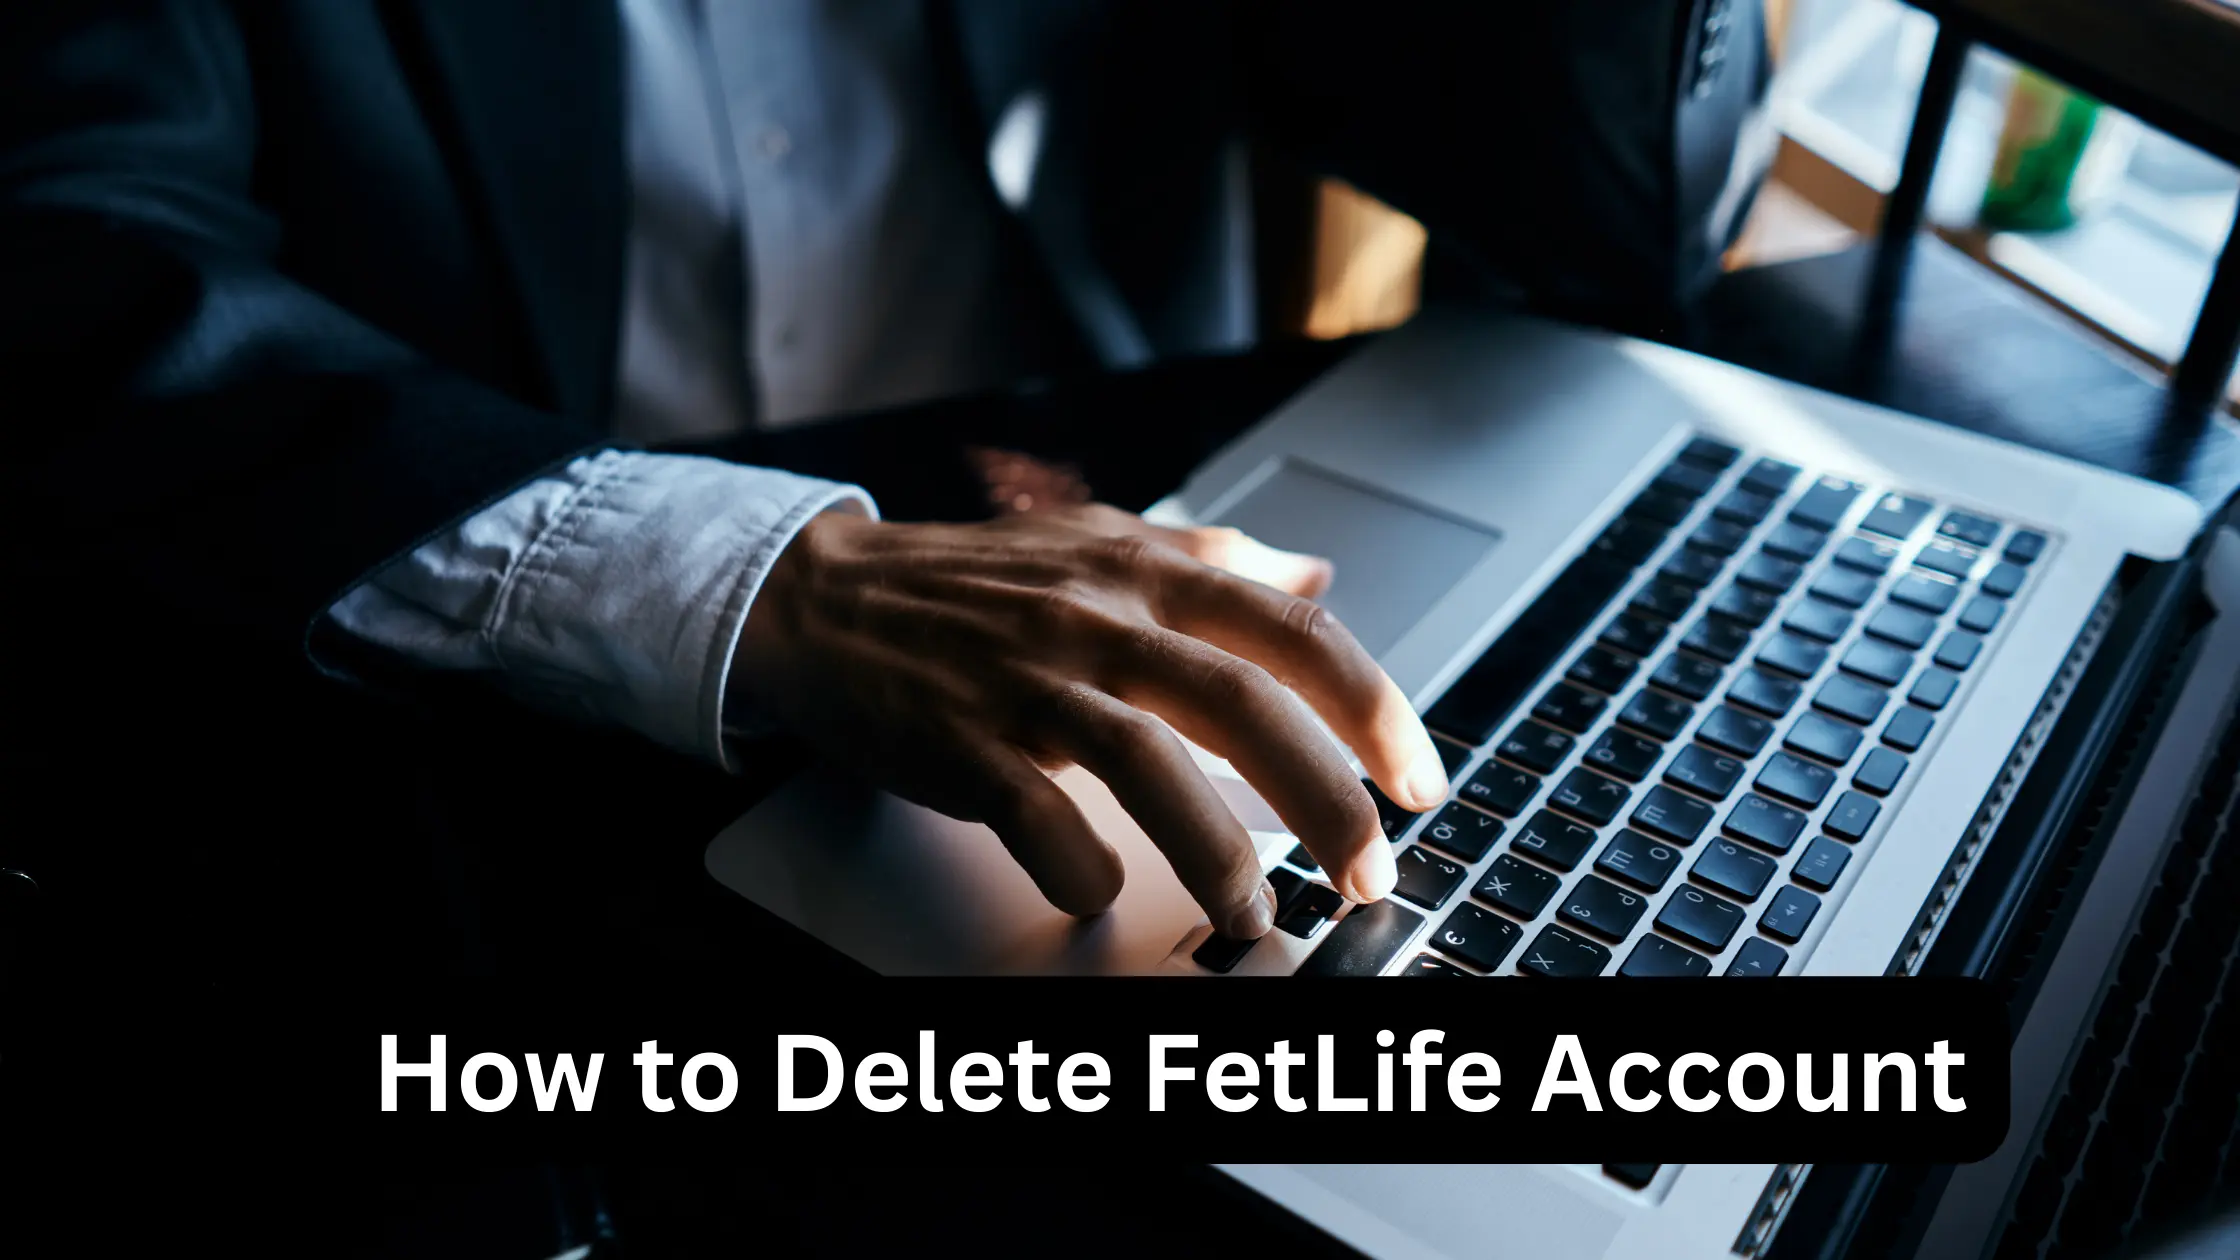 carol s taylor recommends how to delete fetlife pic